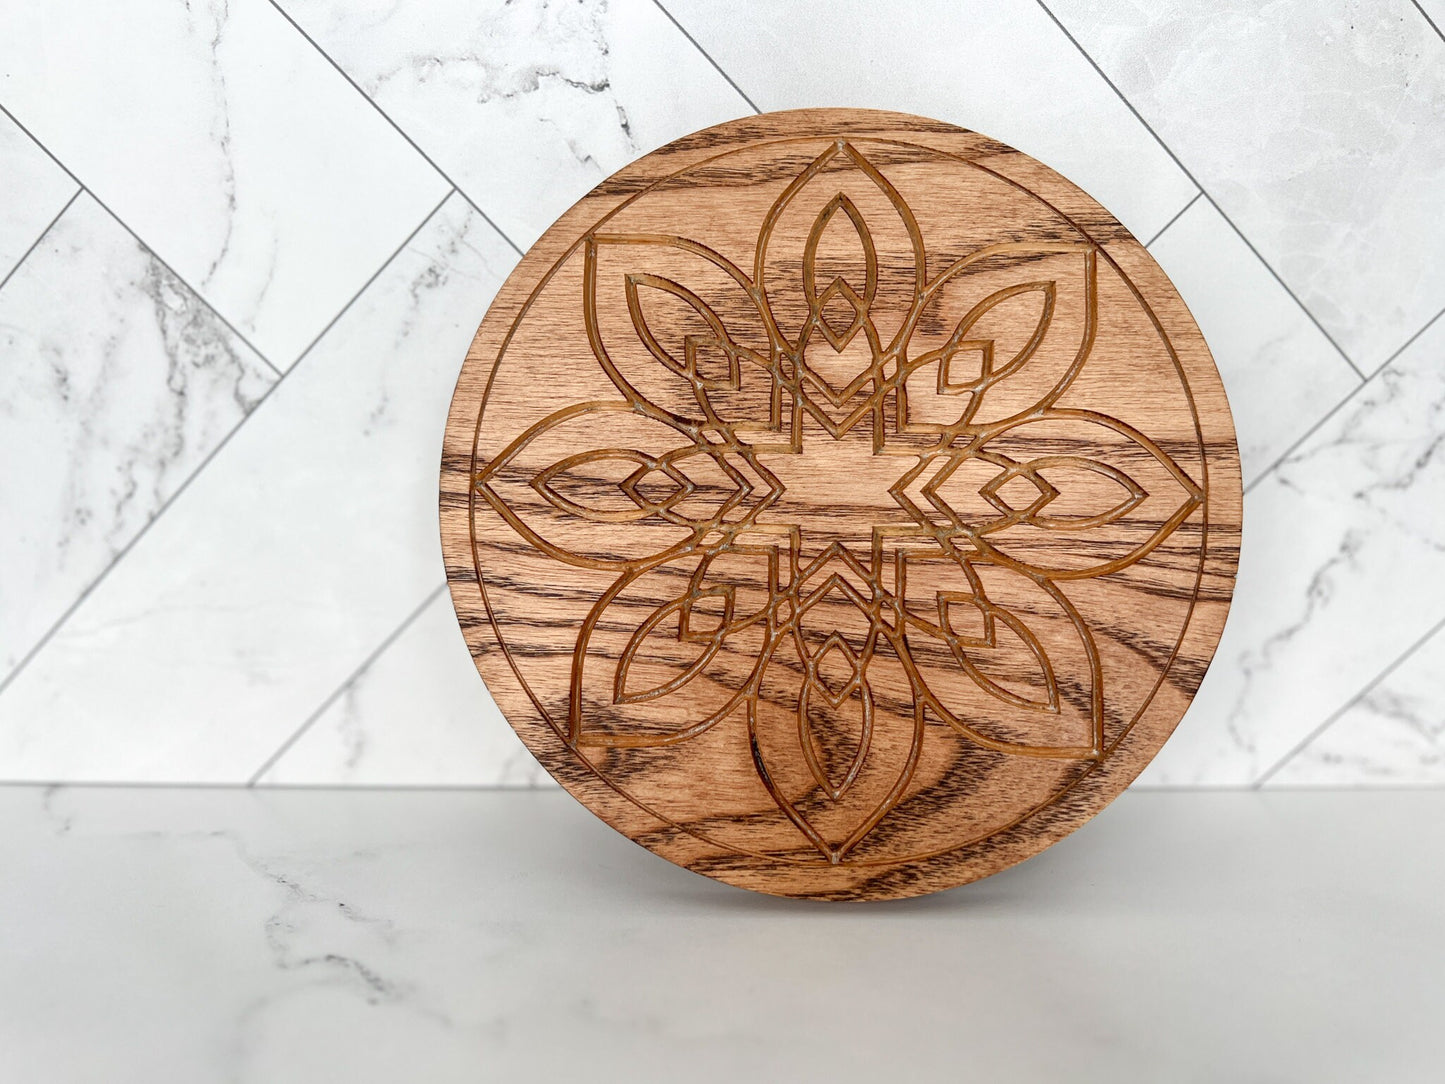 Carved Flower Wooden Trivet, Serving Tray, Wood Trivet for Dining Table, Dining Accessories, Wood Gifts, Hot Tray, Pot Holder